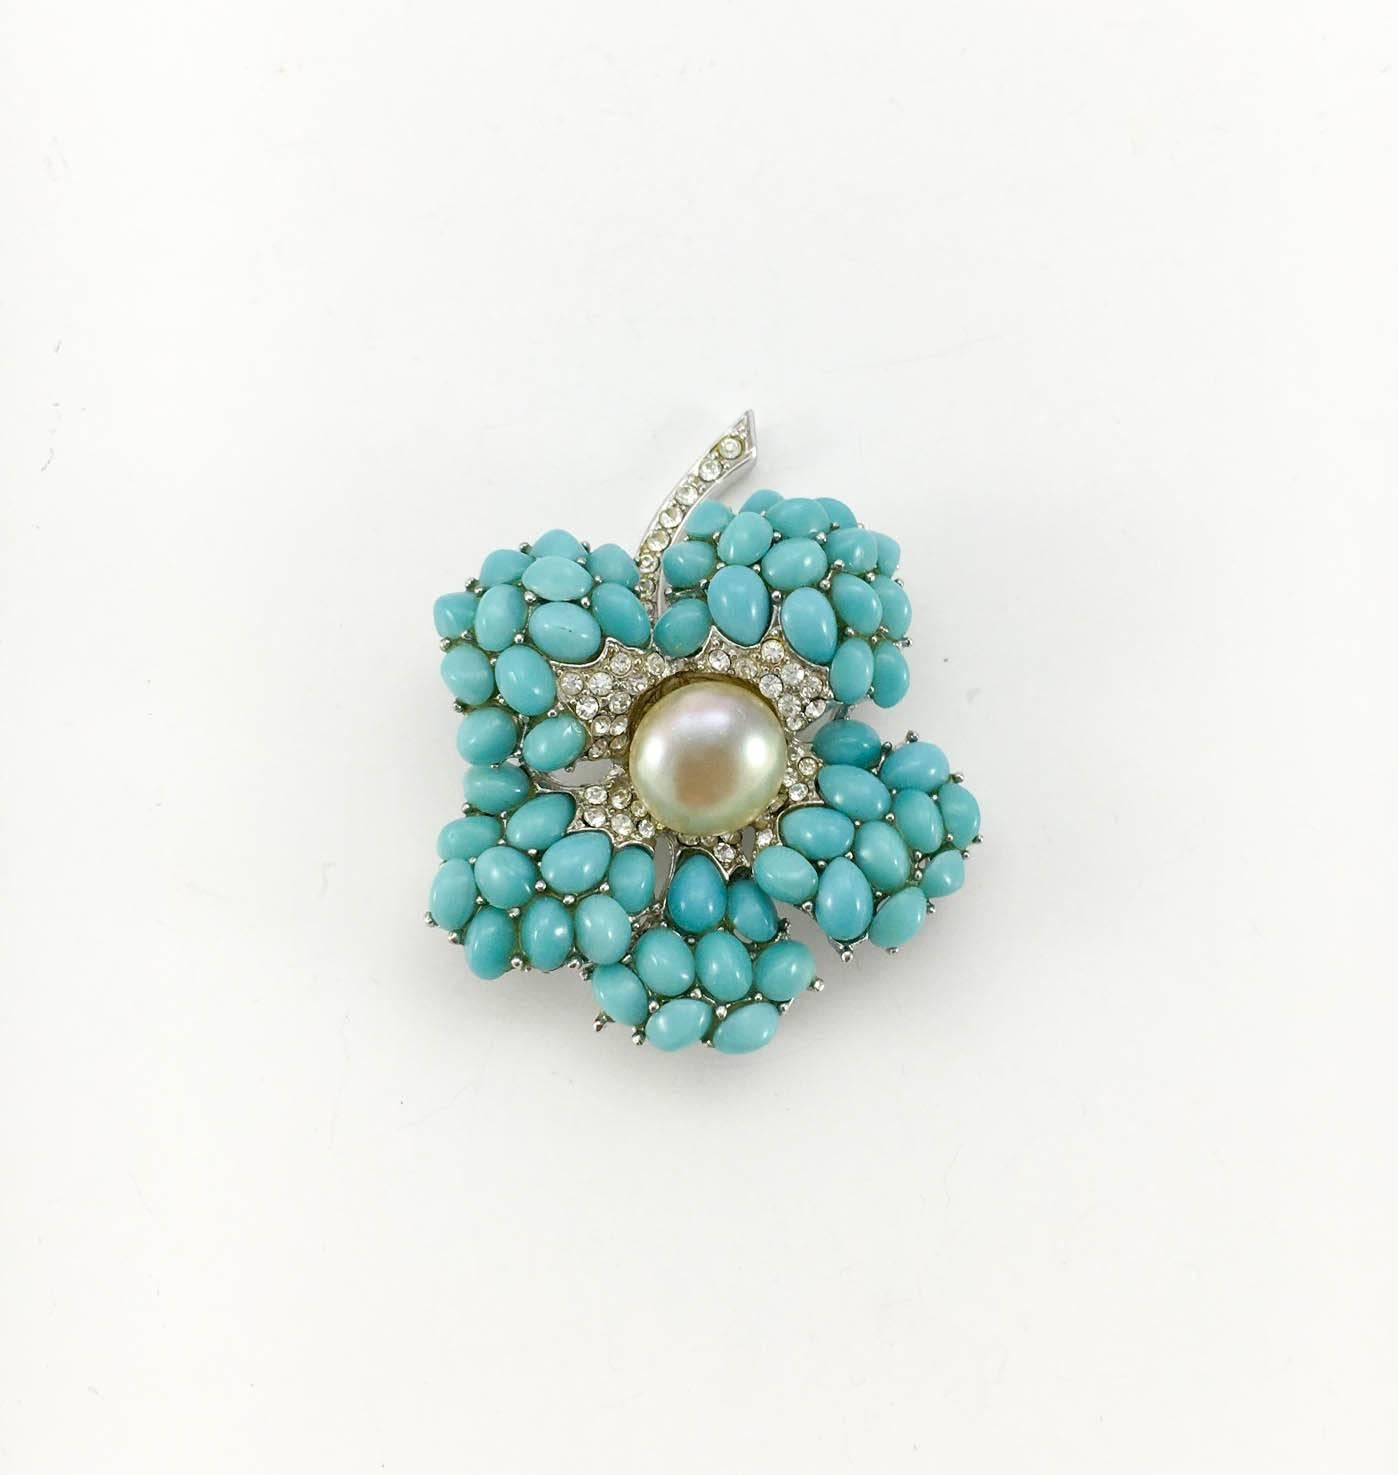 Women's Boucher Faux Turquoise and Pearl Earring and Brooch Set - 1950s